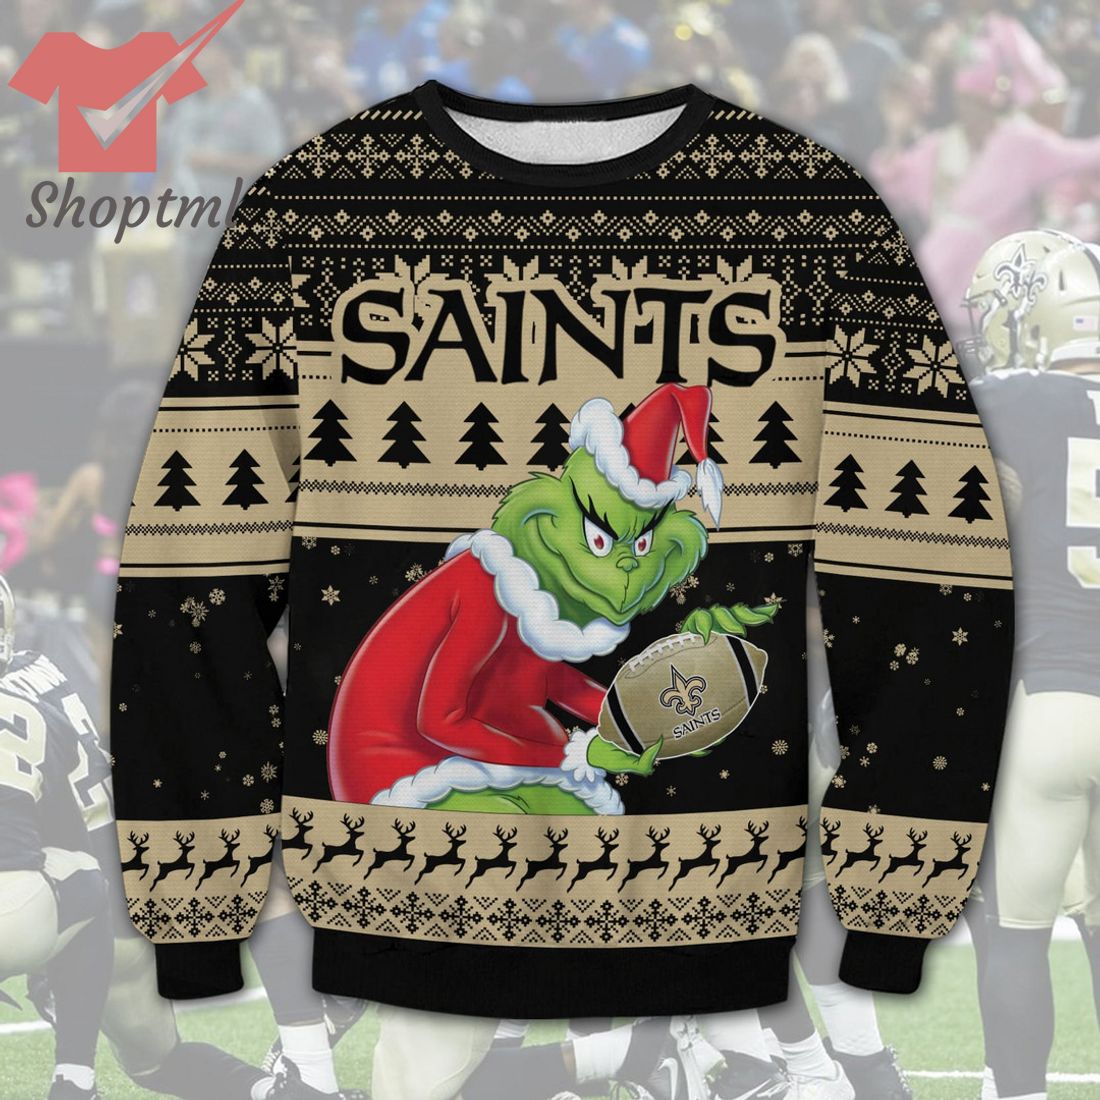 New Orleans Saints NFL Grinch Ugly Christmas Sweater